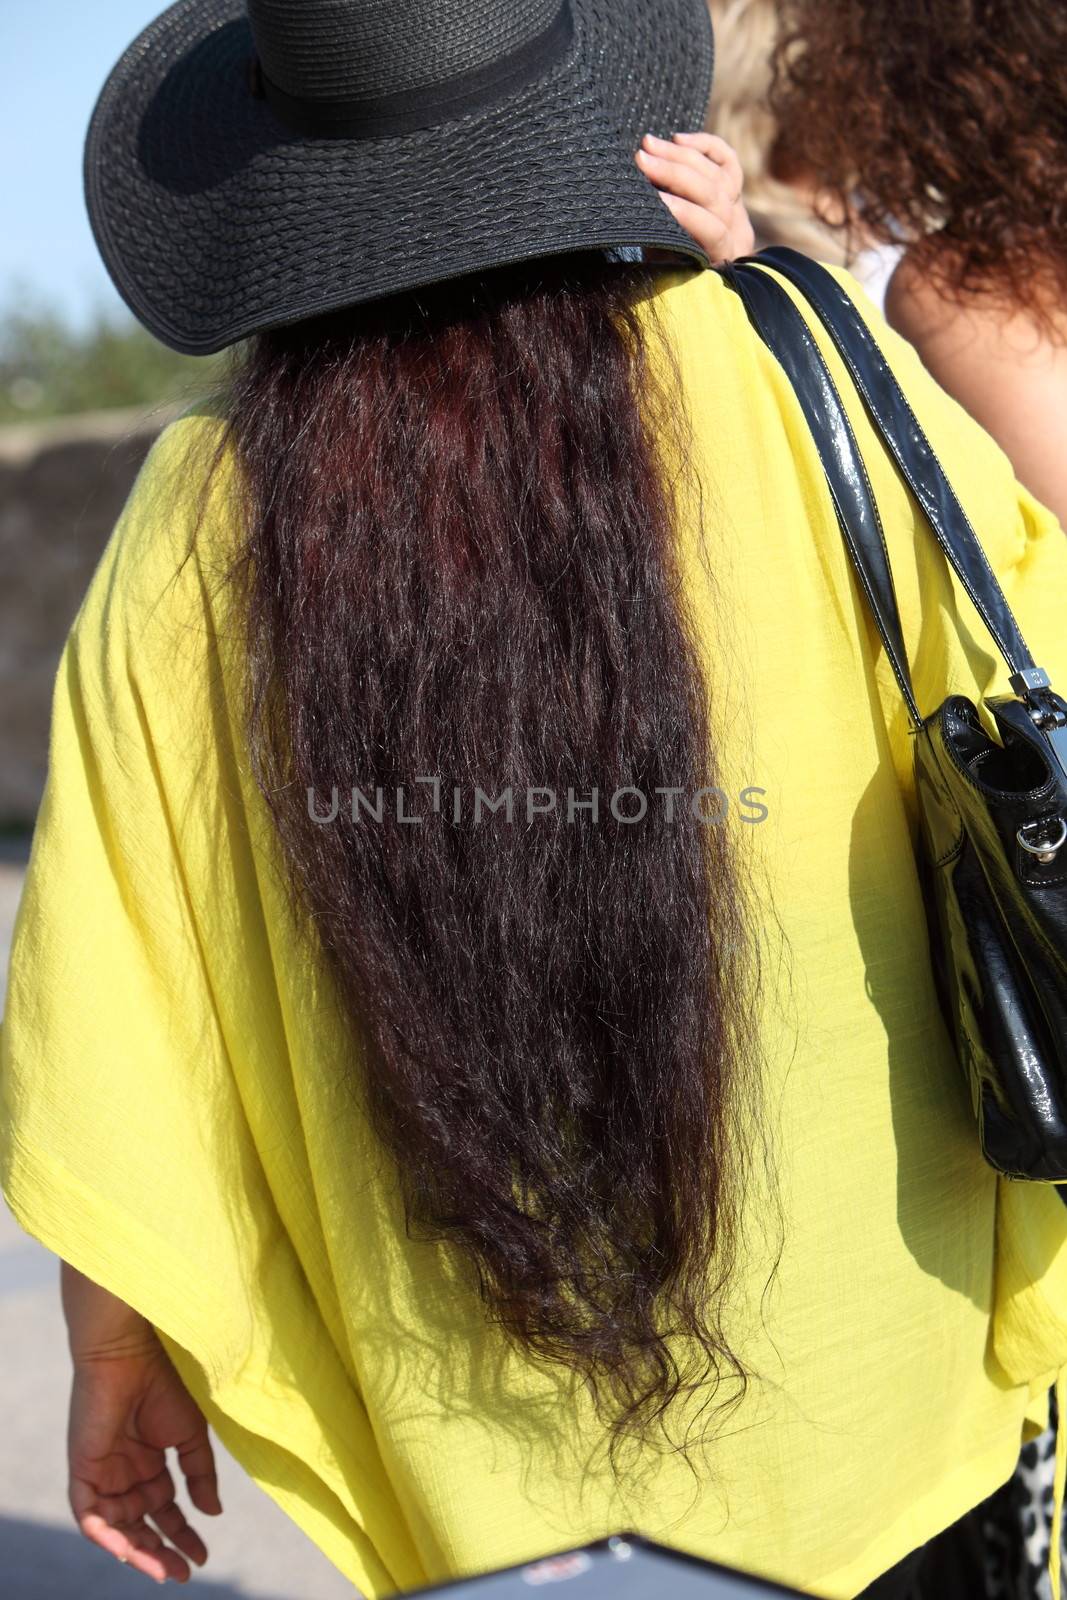 Rear view of a woman with very long wavy luxurious brunette hair hanging down her back